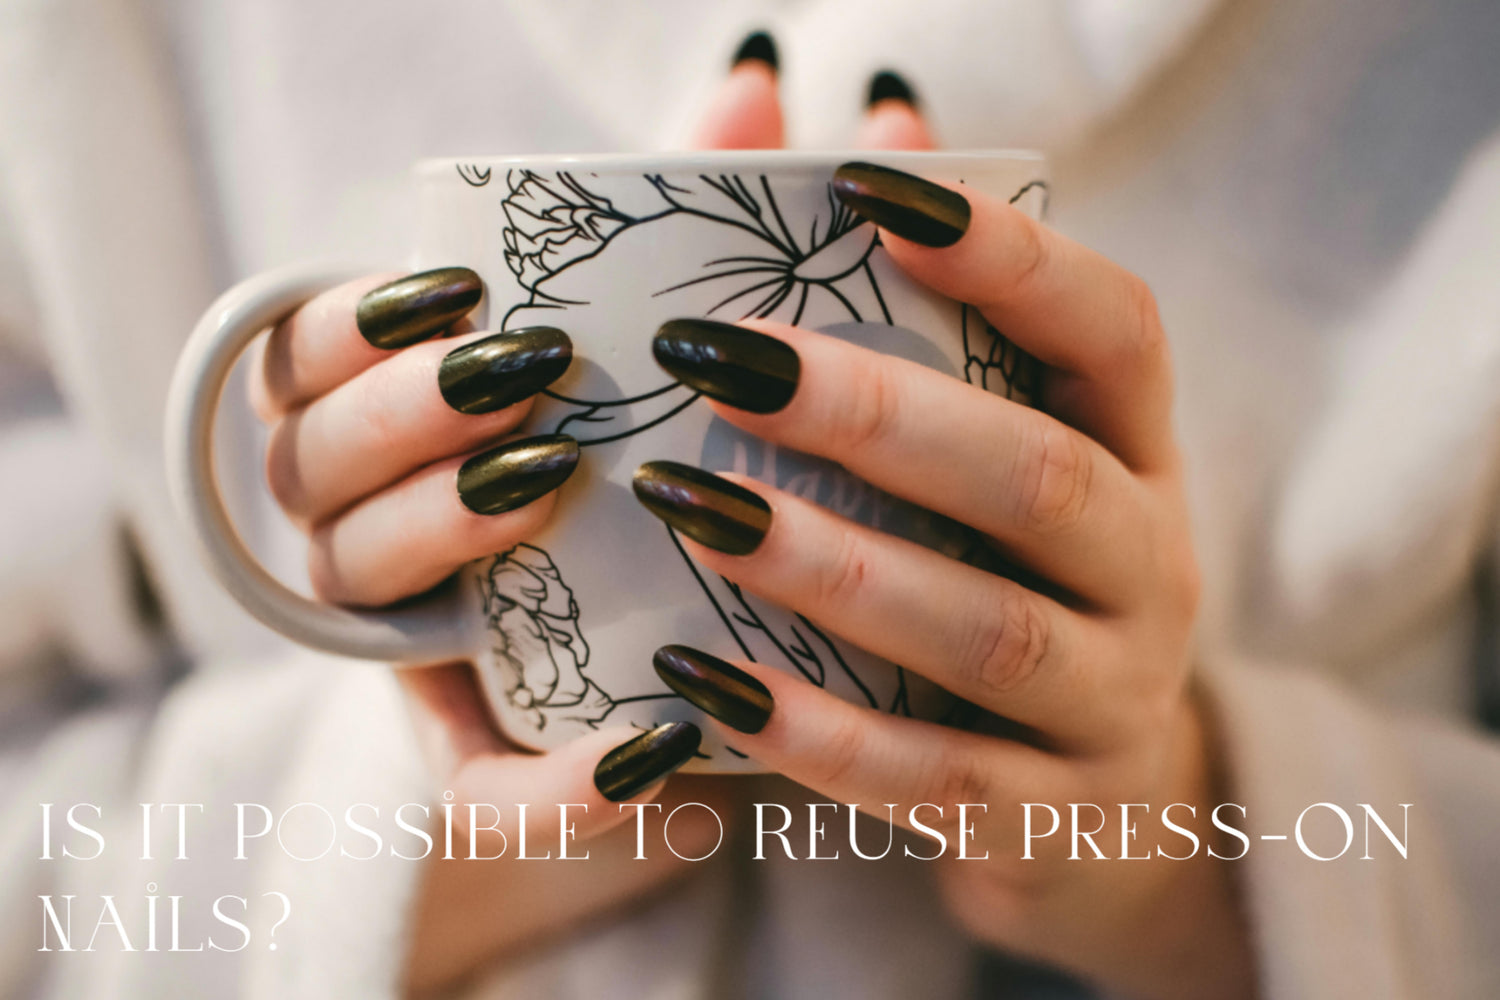 Is It Possible to Reuse Press-On Nails?